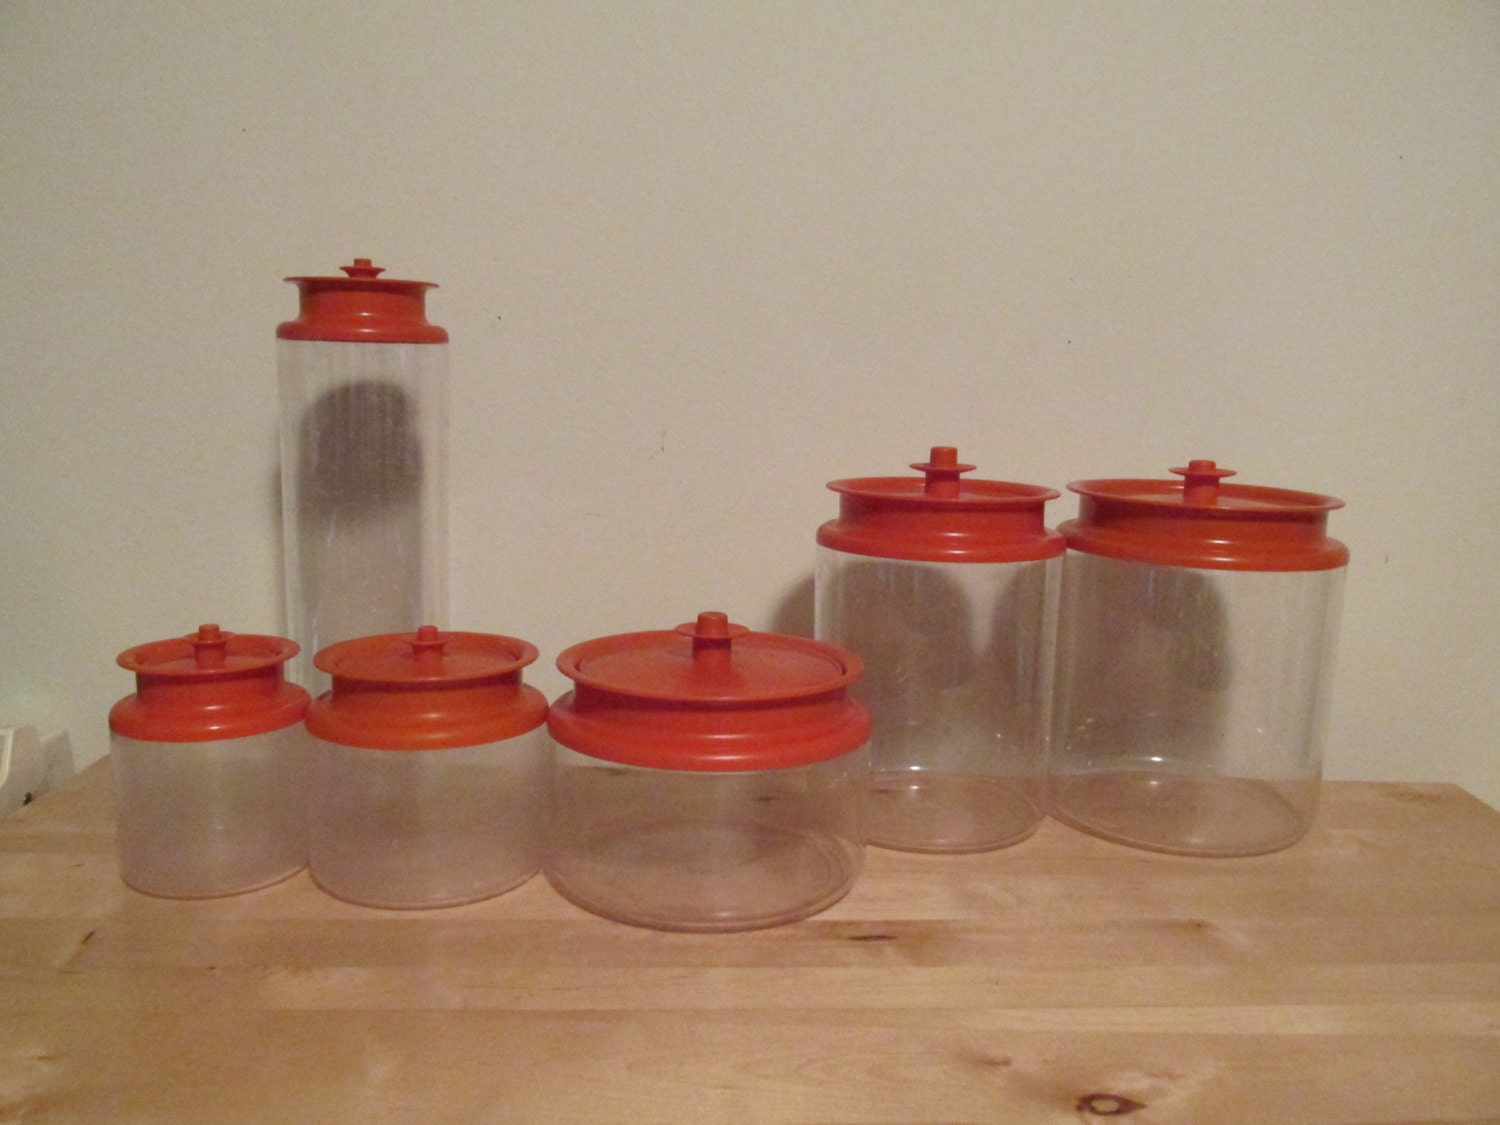 6 Pieces Orange Tupperware Kitchen Canister Set By Theretroredhead